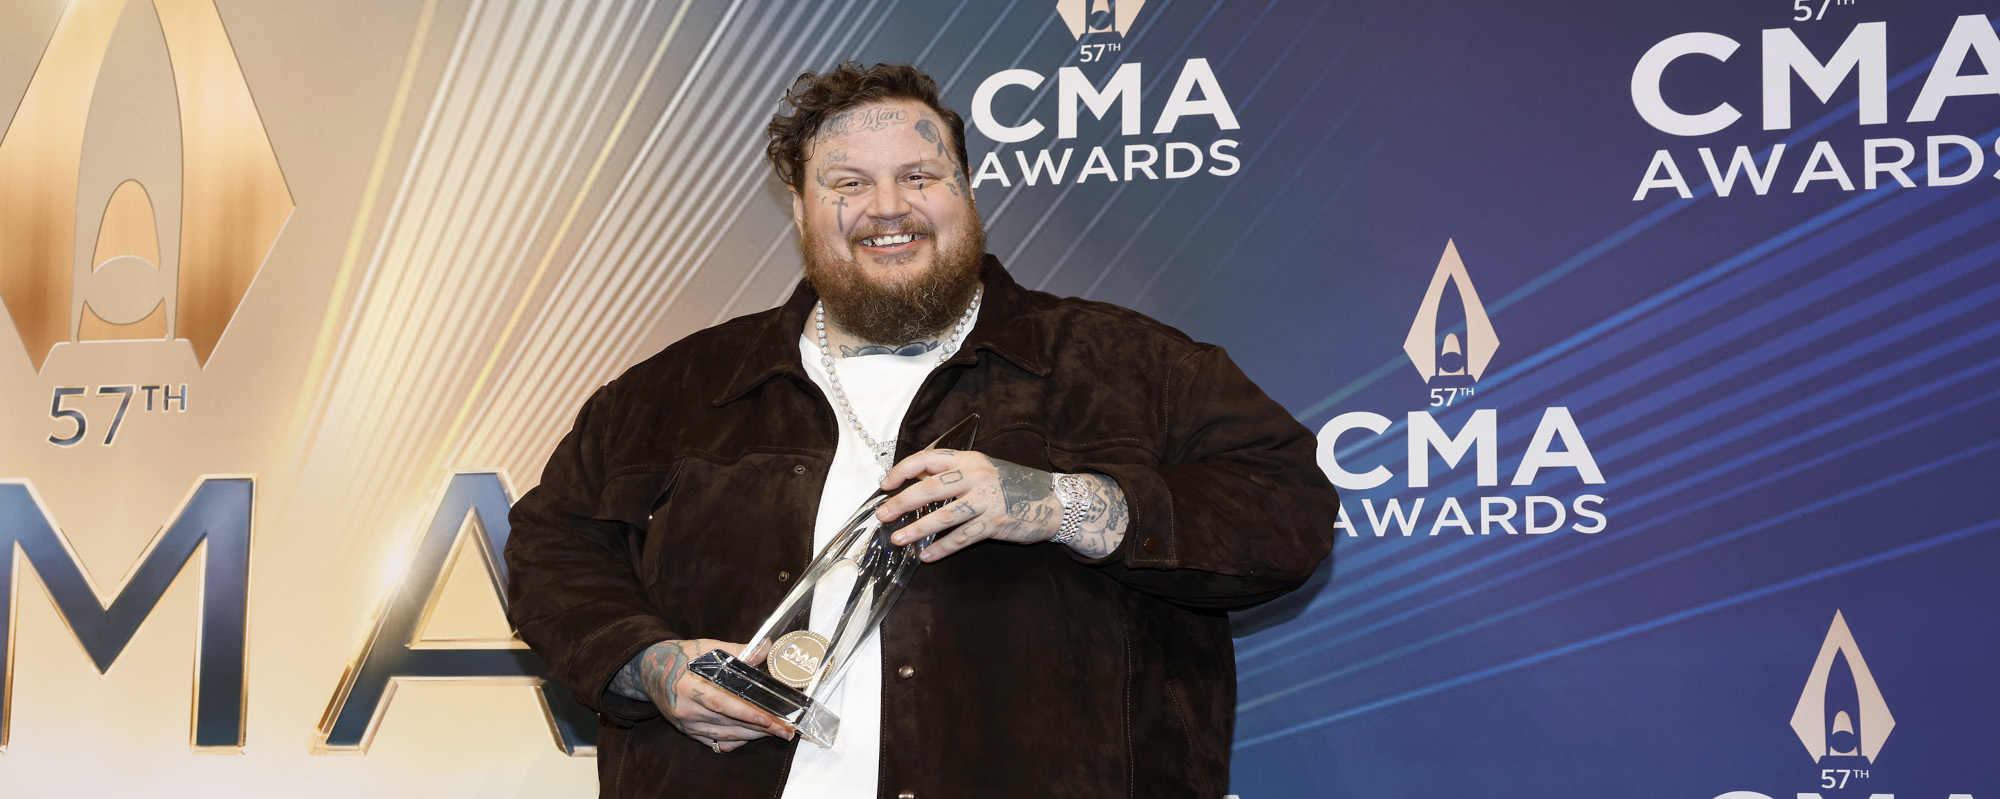 Exclusive: Jelly Roll on Grammy Nominations: “I’ve Been Crying all Morning”